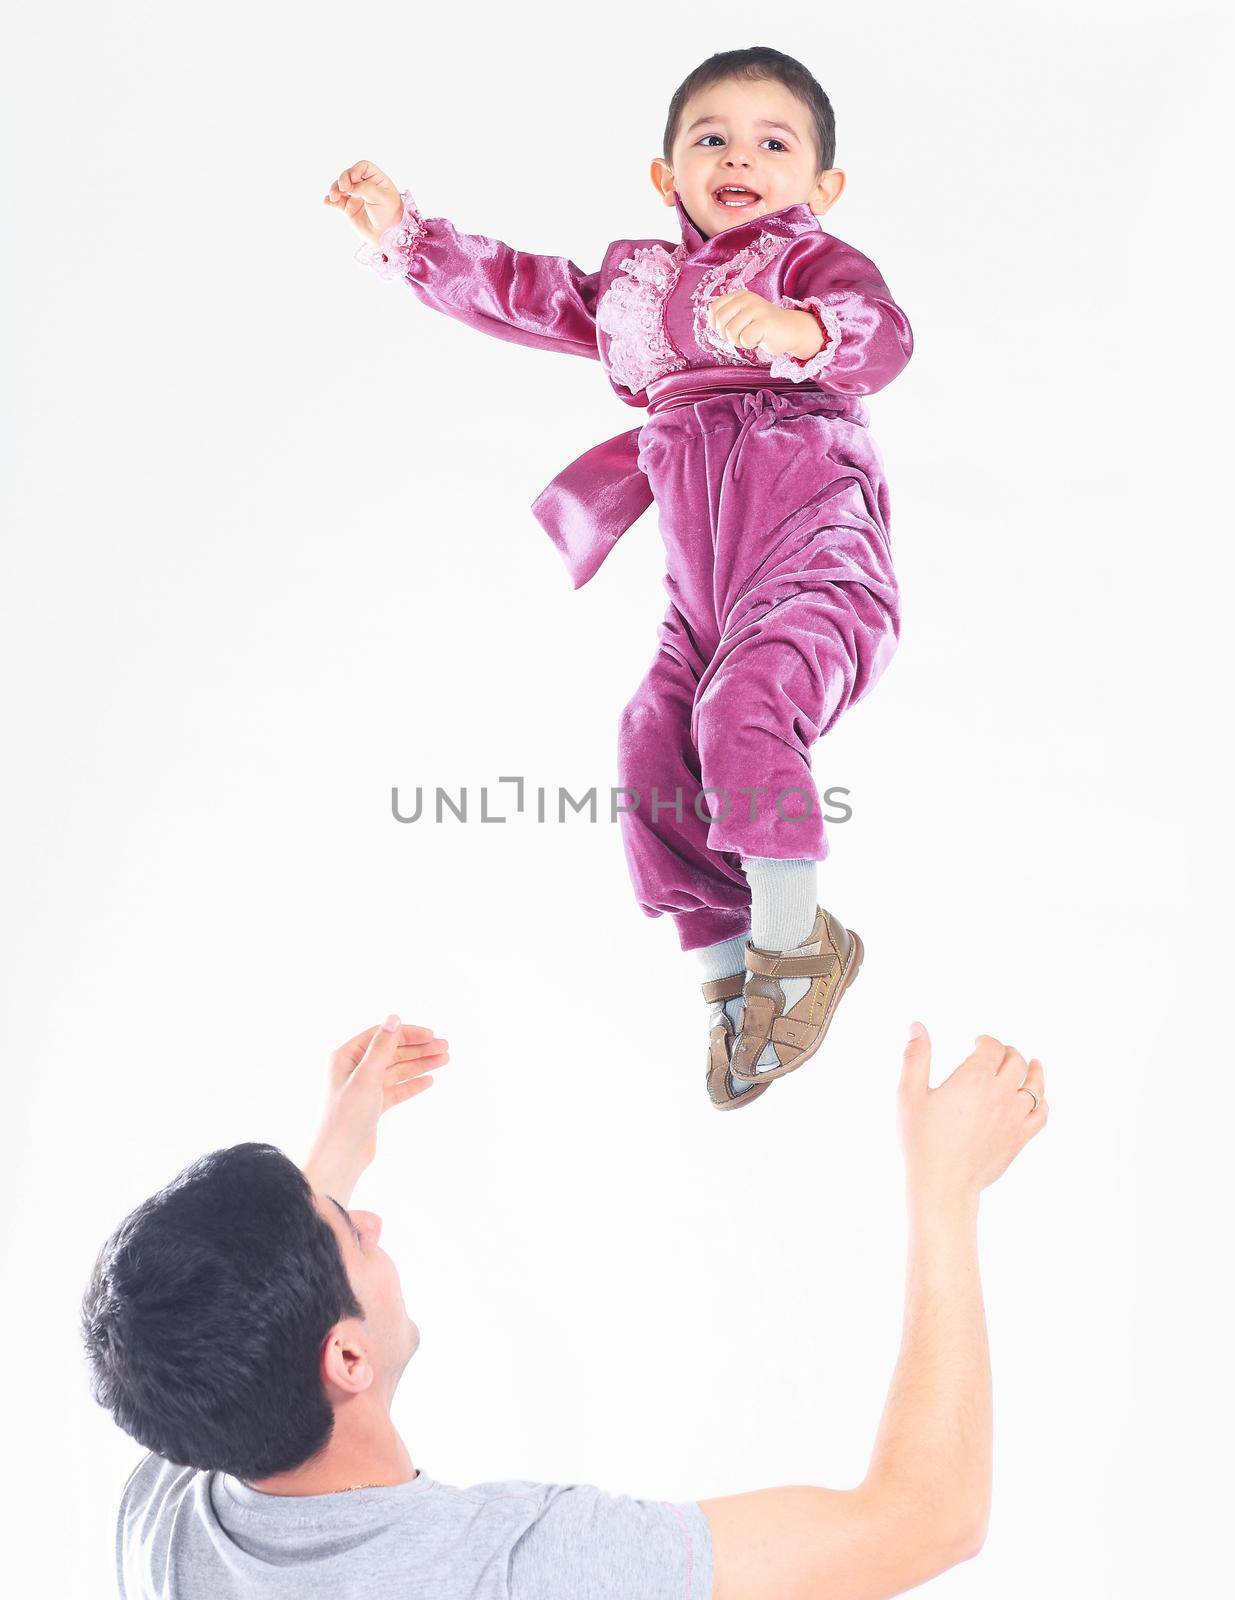 happy child.the father and the son.a child in Gypsy national costume.the photo with blank space for text